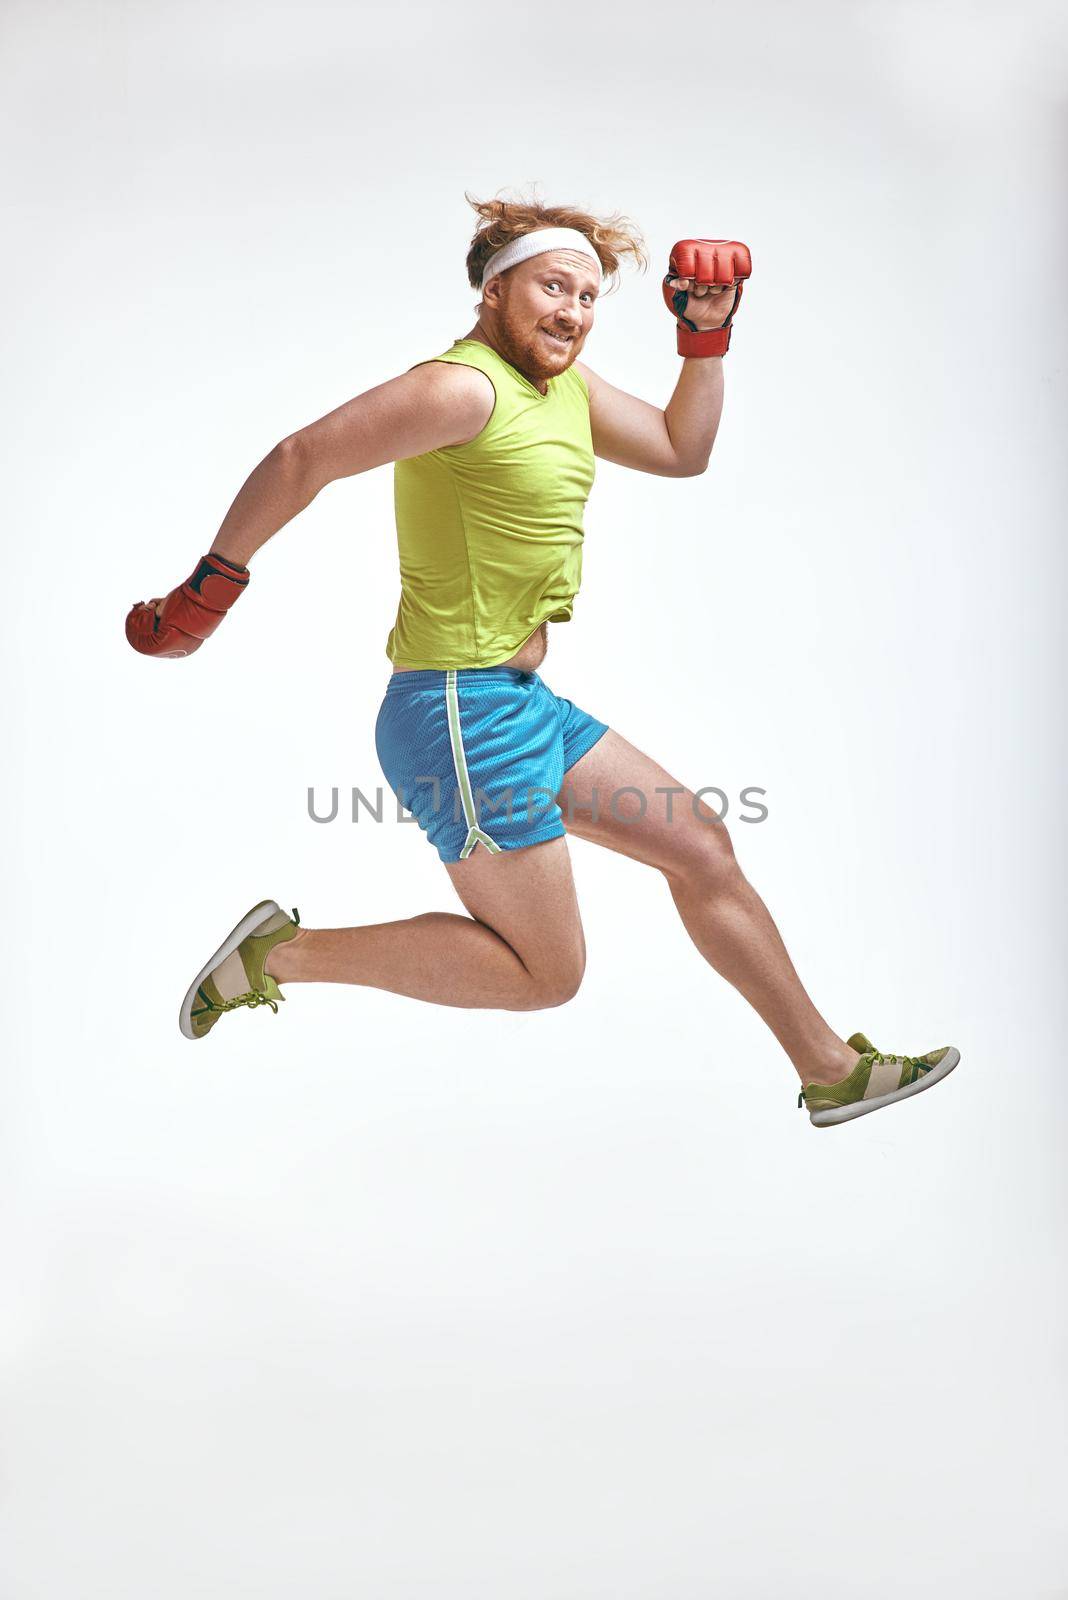 Funny picture of red haired, bearded, plump man on white background. Man wearing sportswear and red boxing gloves